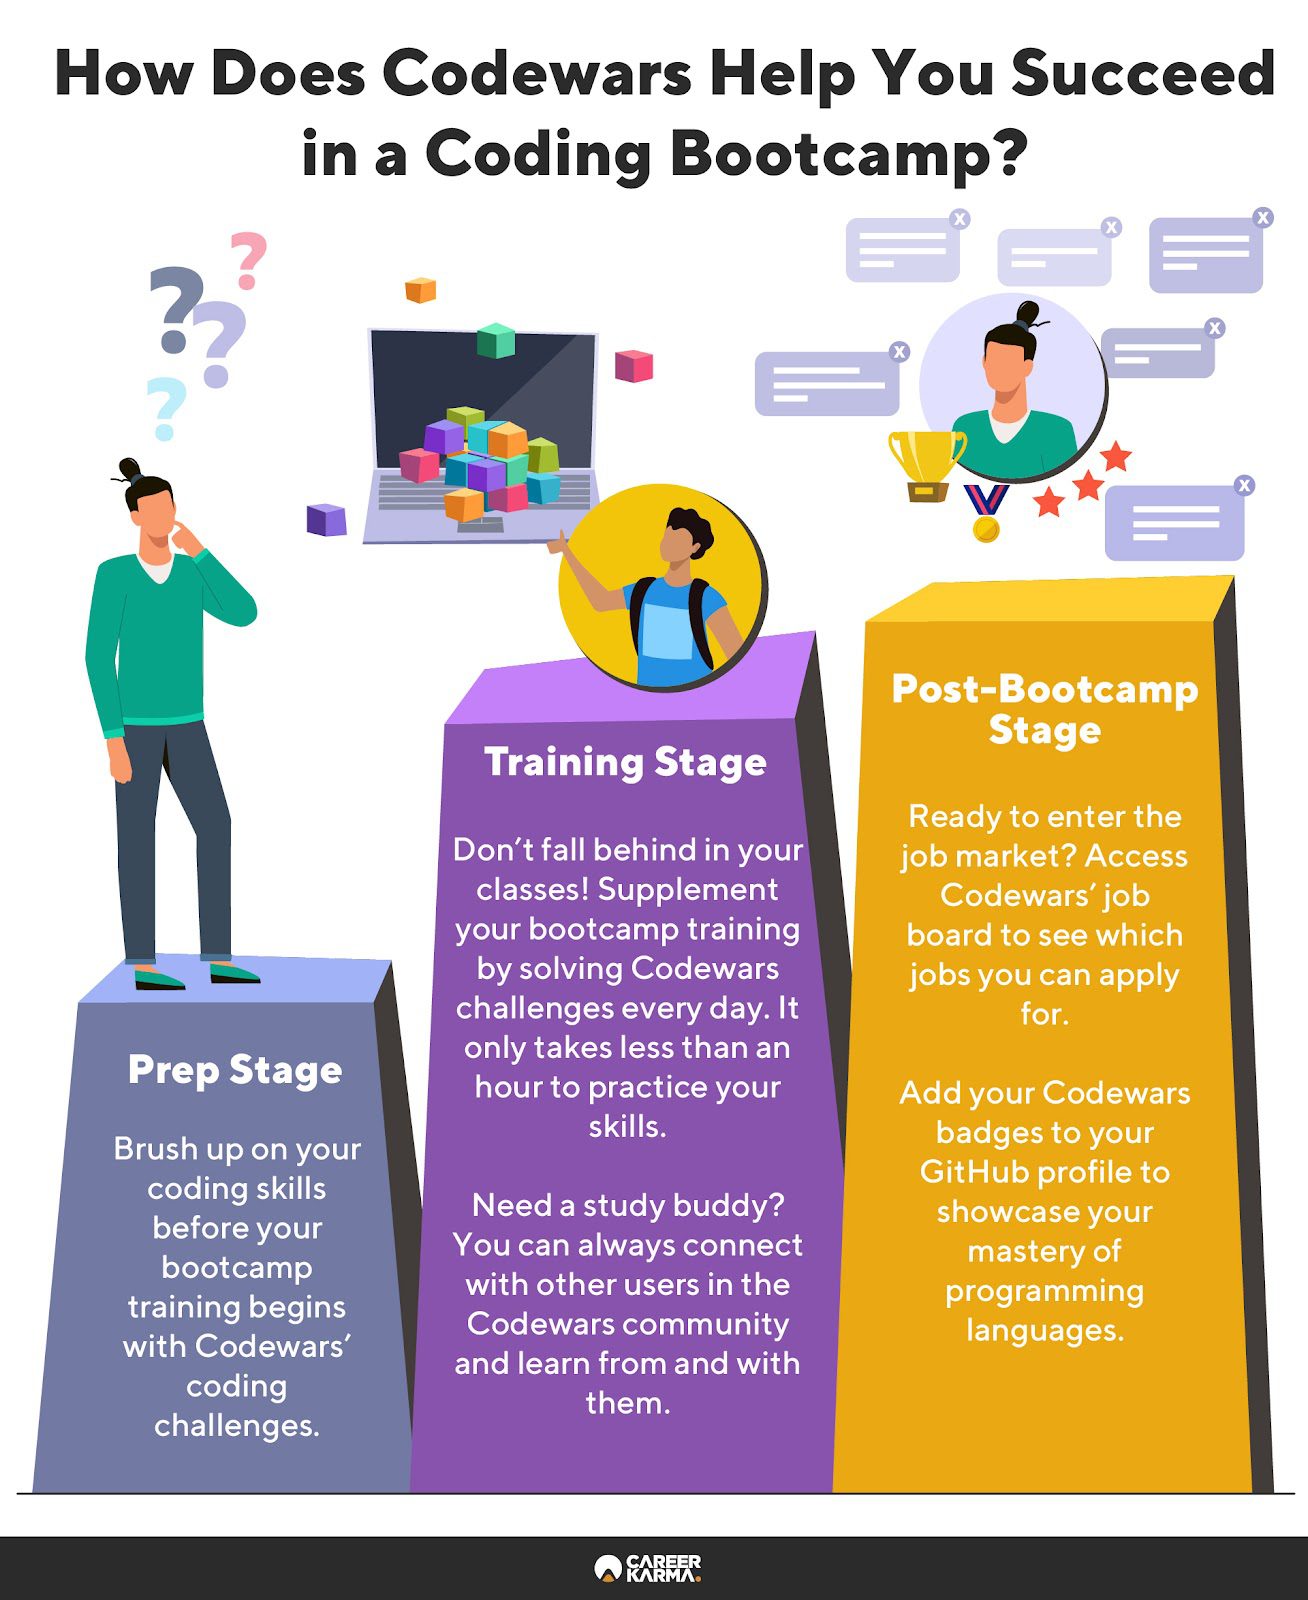 An infographic summarizing how Codewars can help you succeed at a coding bootcamp